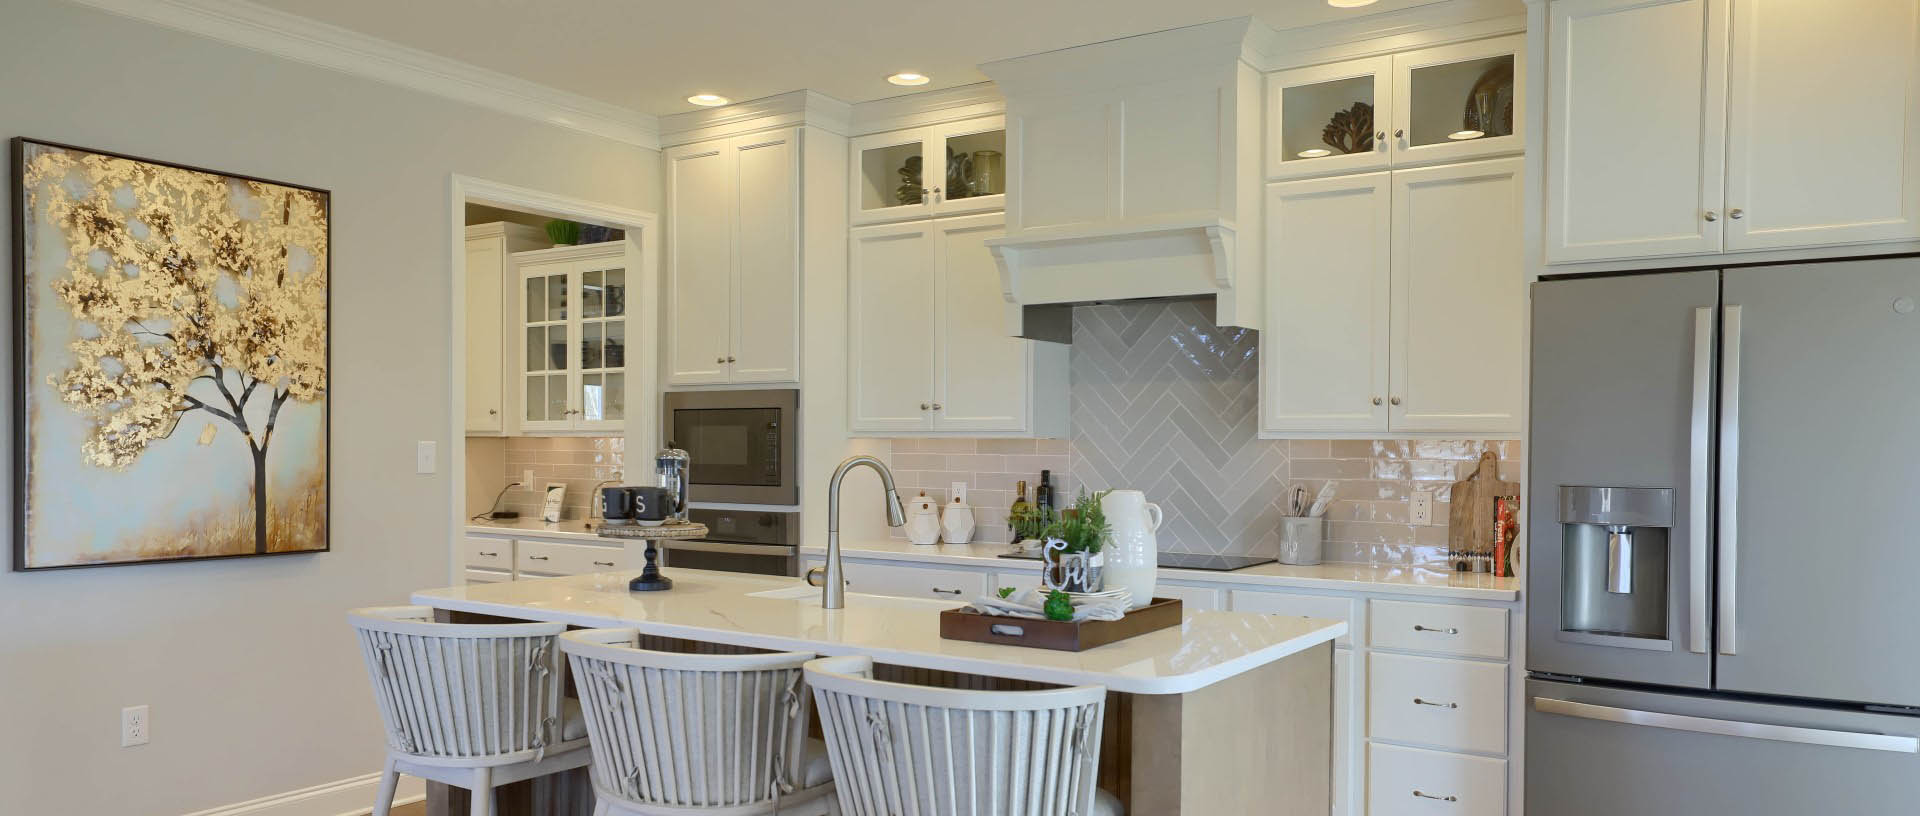 Spring Meadow Reserve Model Home Kitchen